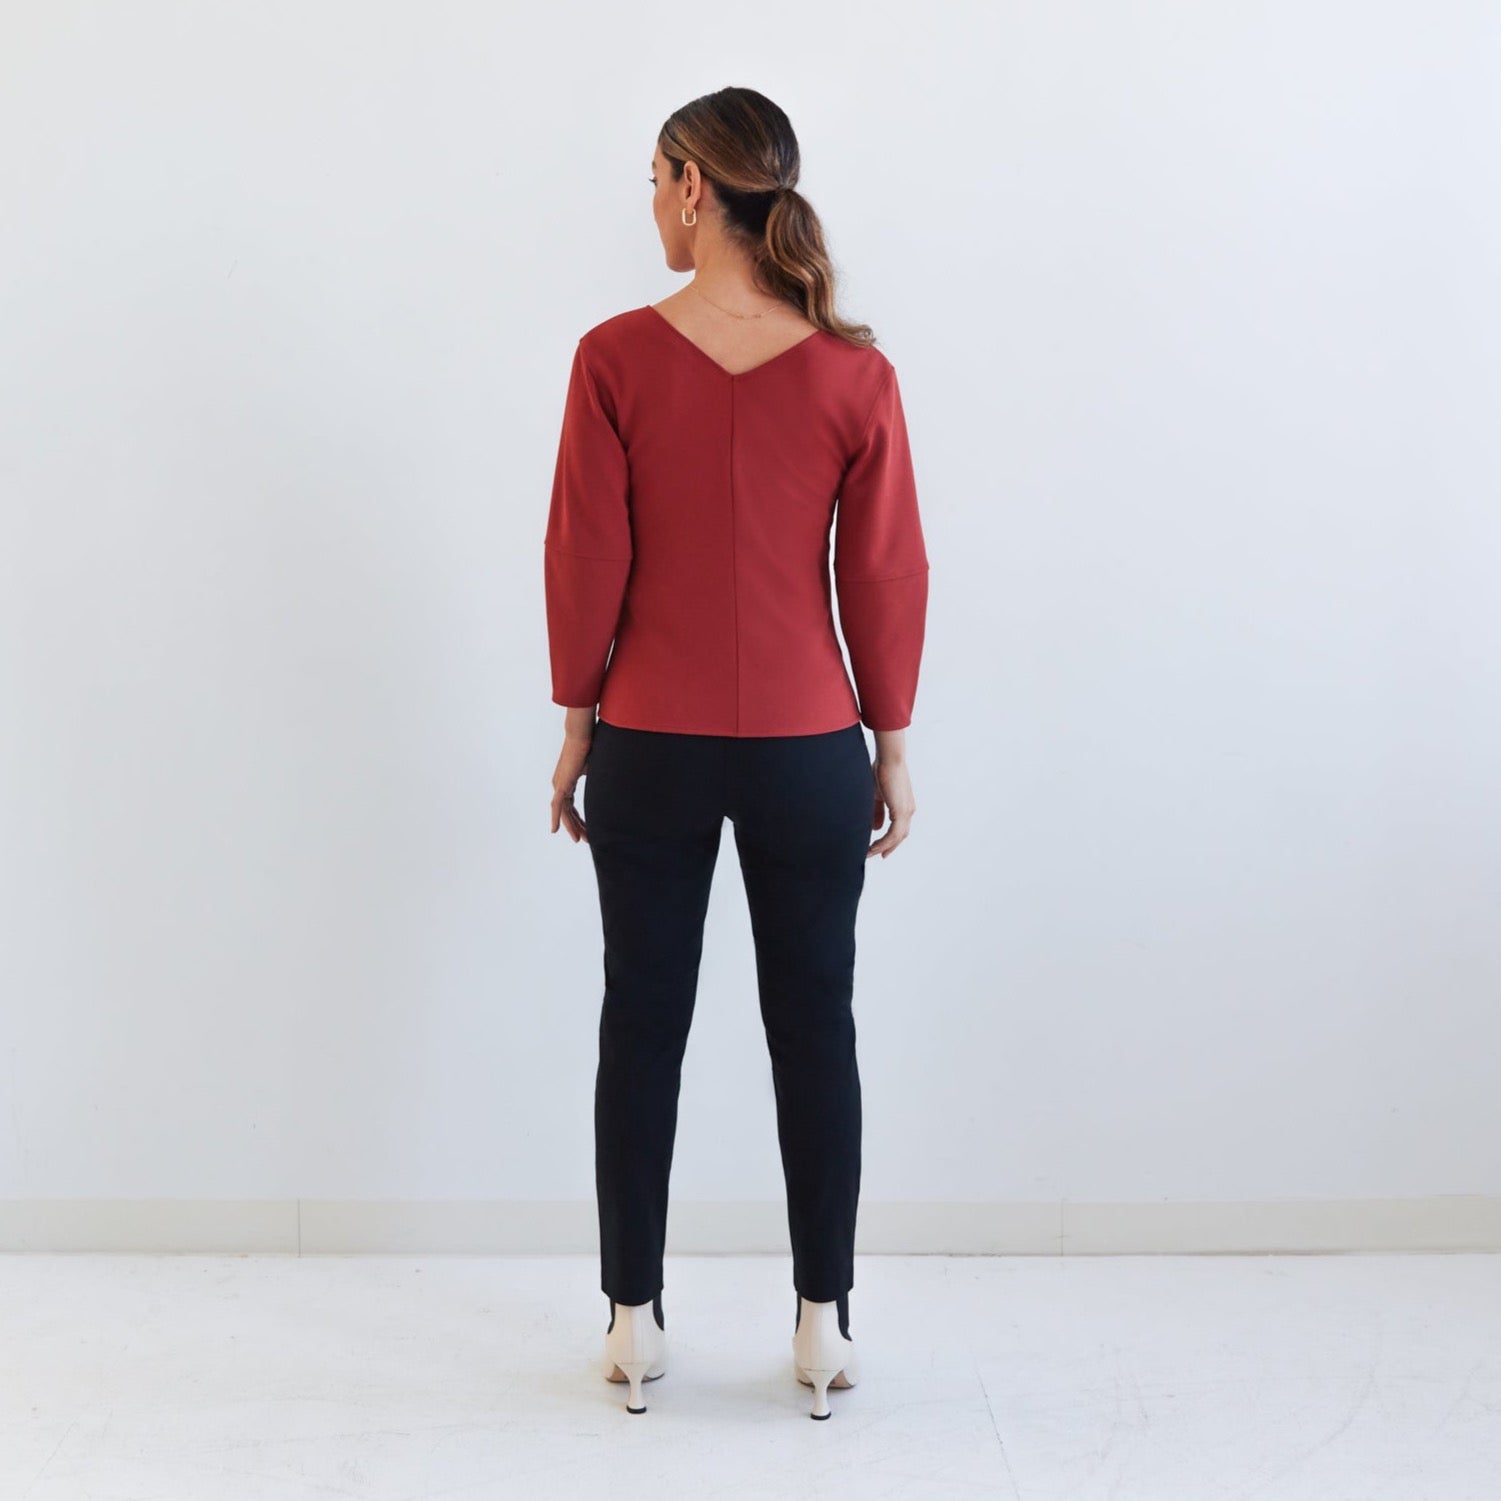 The Sculpted Knit Top in Cirrus Crepe